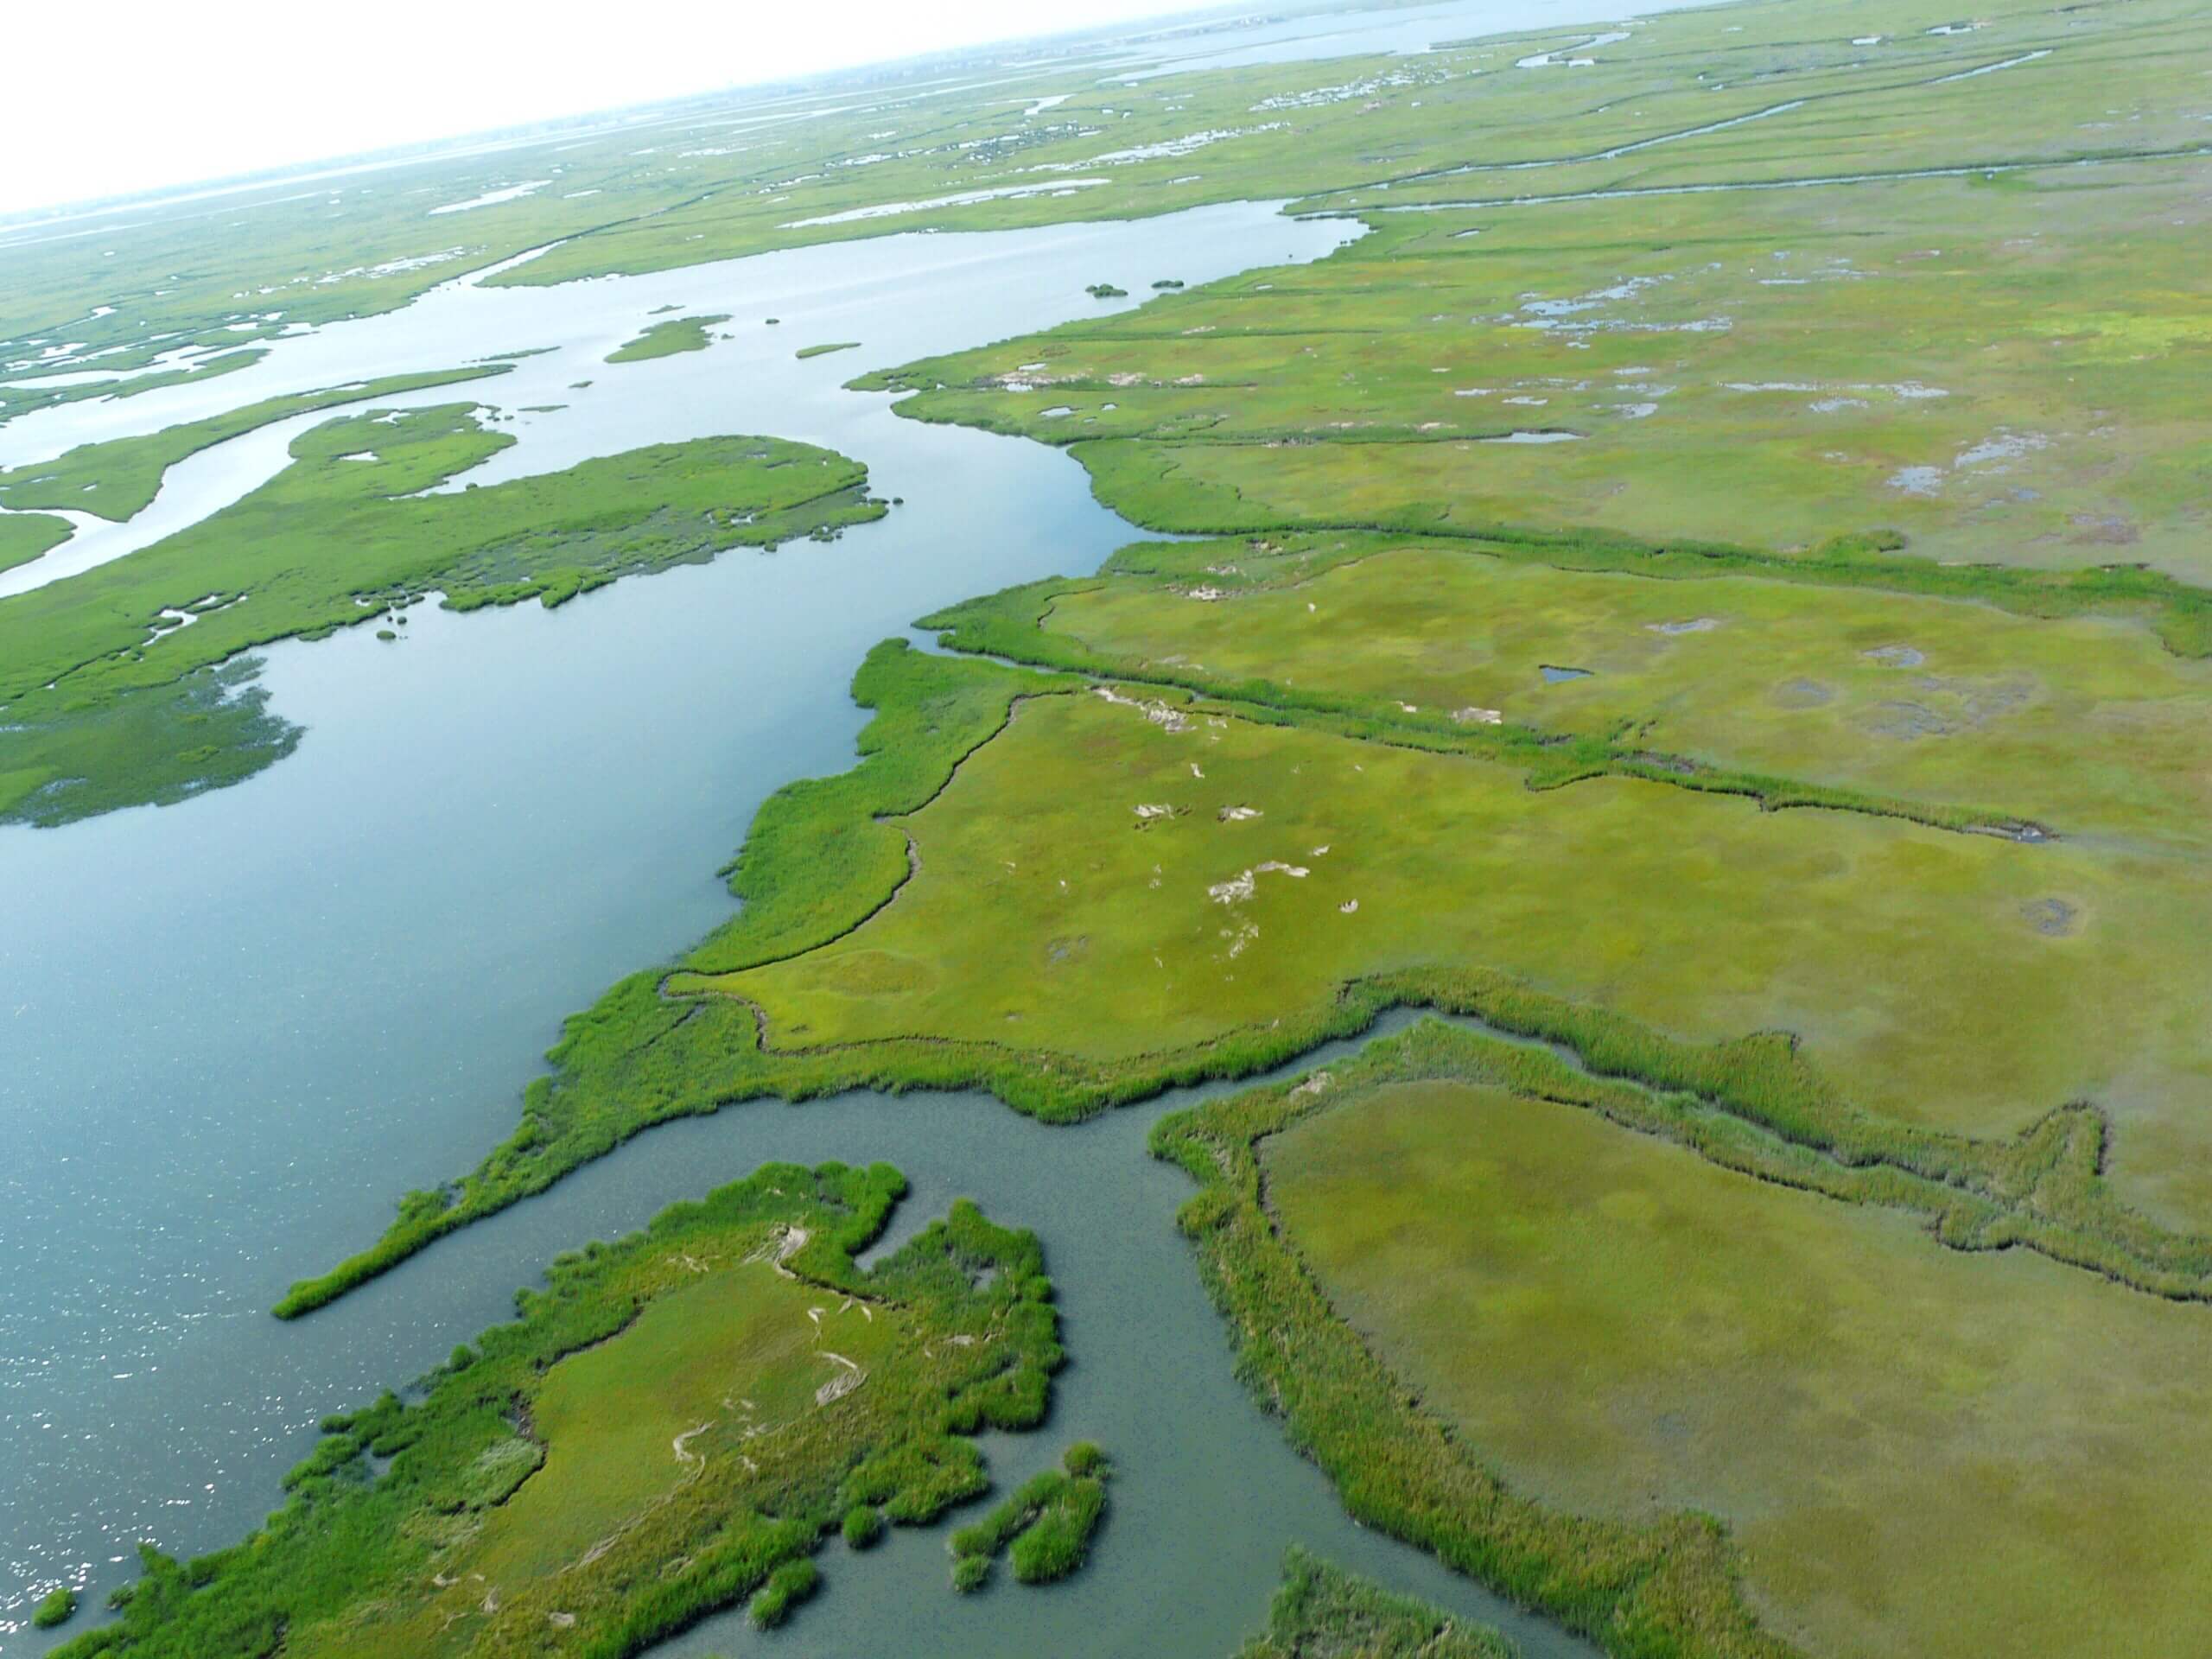 A helicopter view of canals dug by the Cape May County Department of Mosquito Control to drain stagnant water.